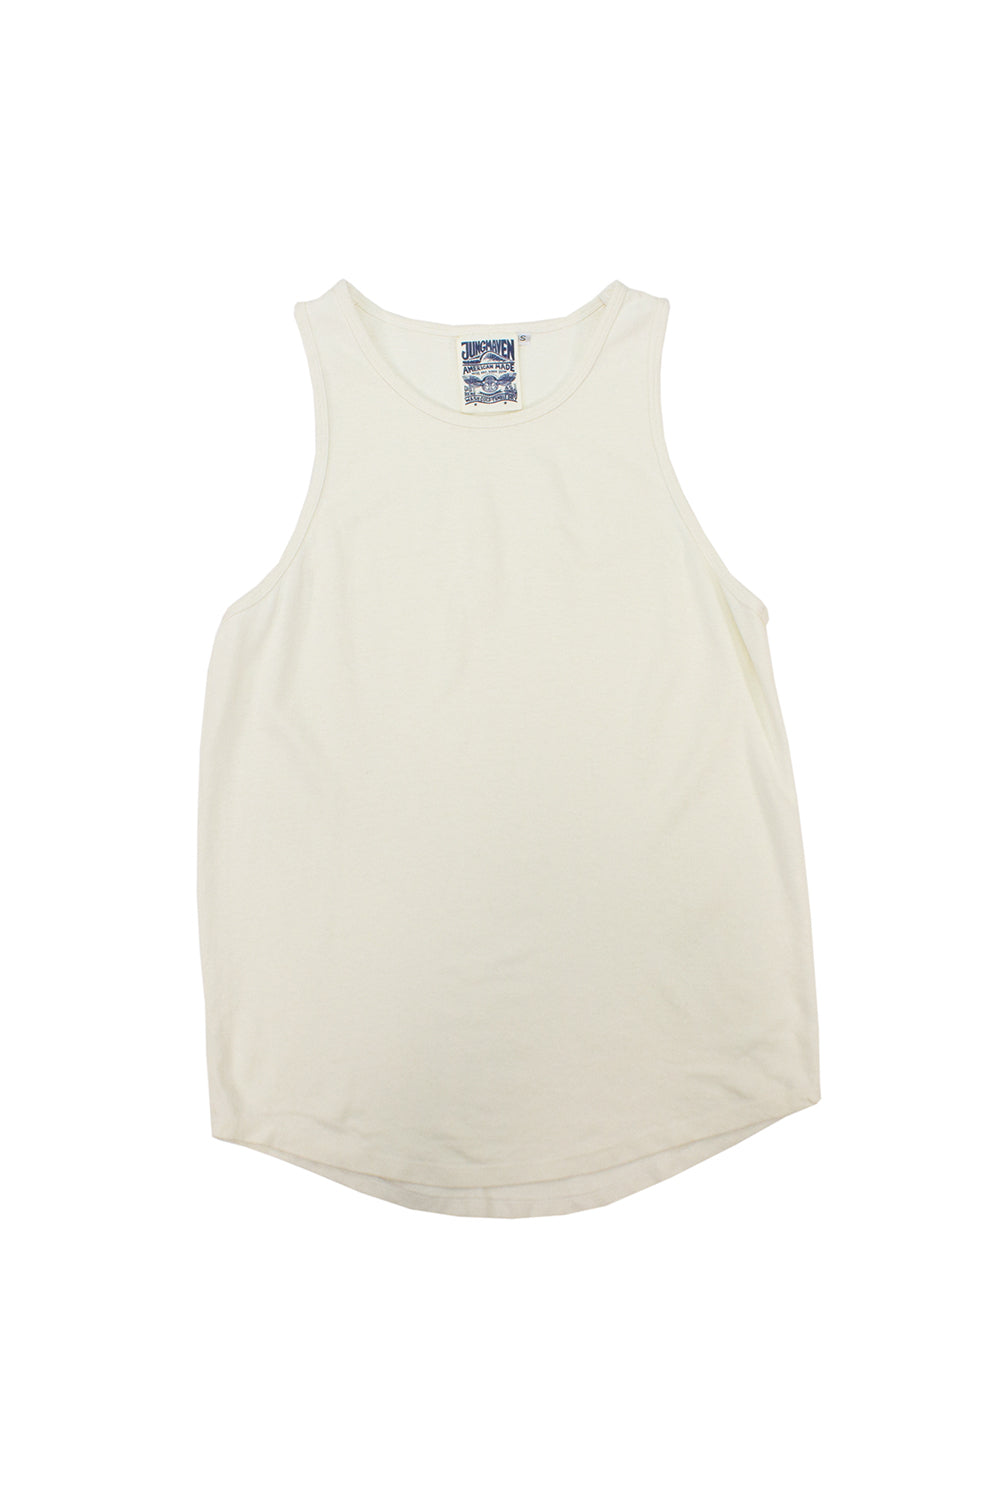 Tank Top | Jungmaven Hemp Clothing & Accessories / Color: Washed White